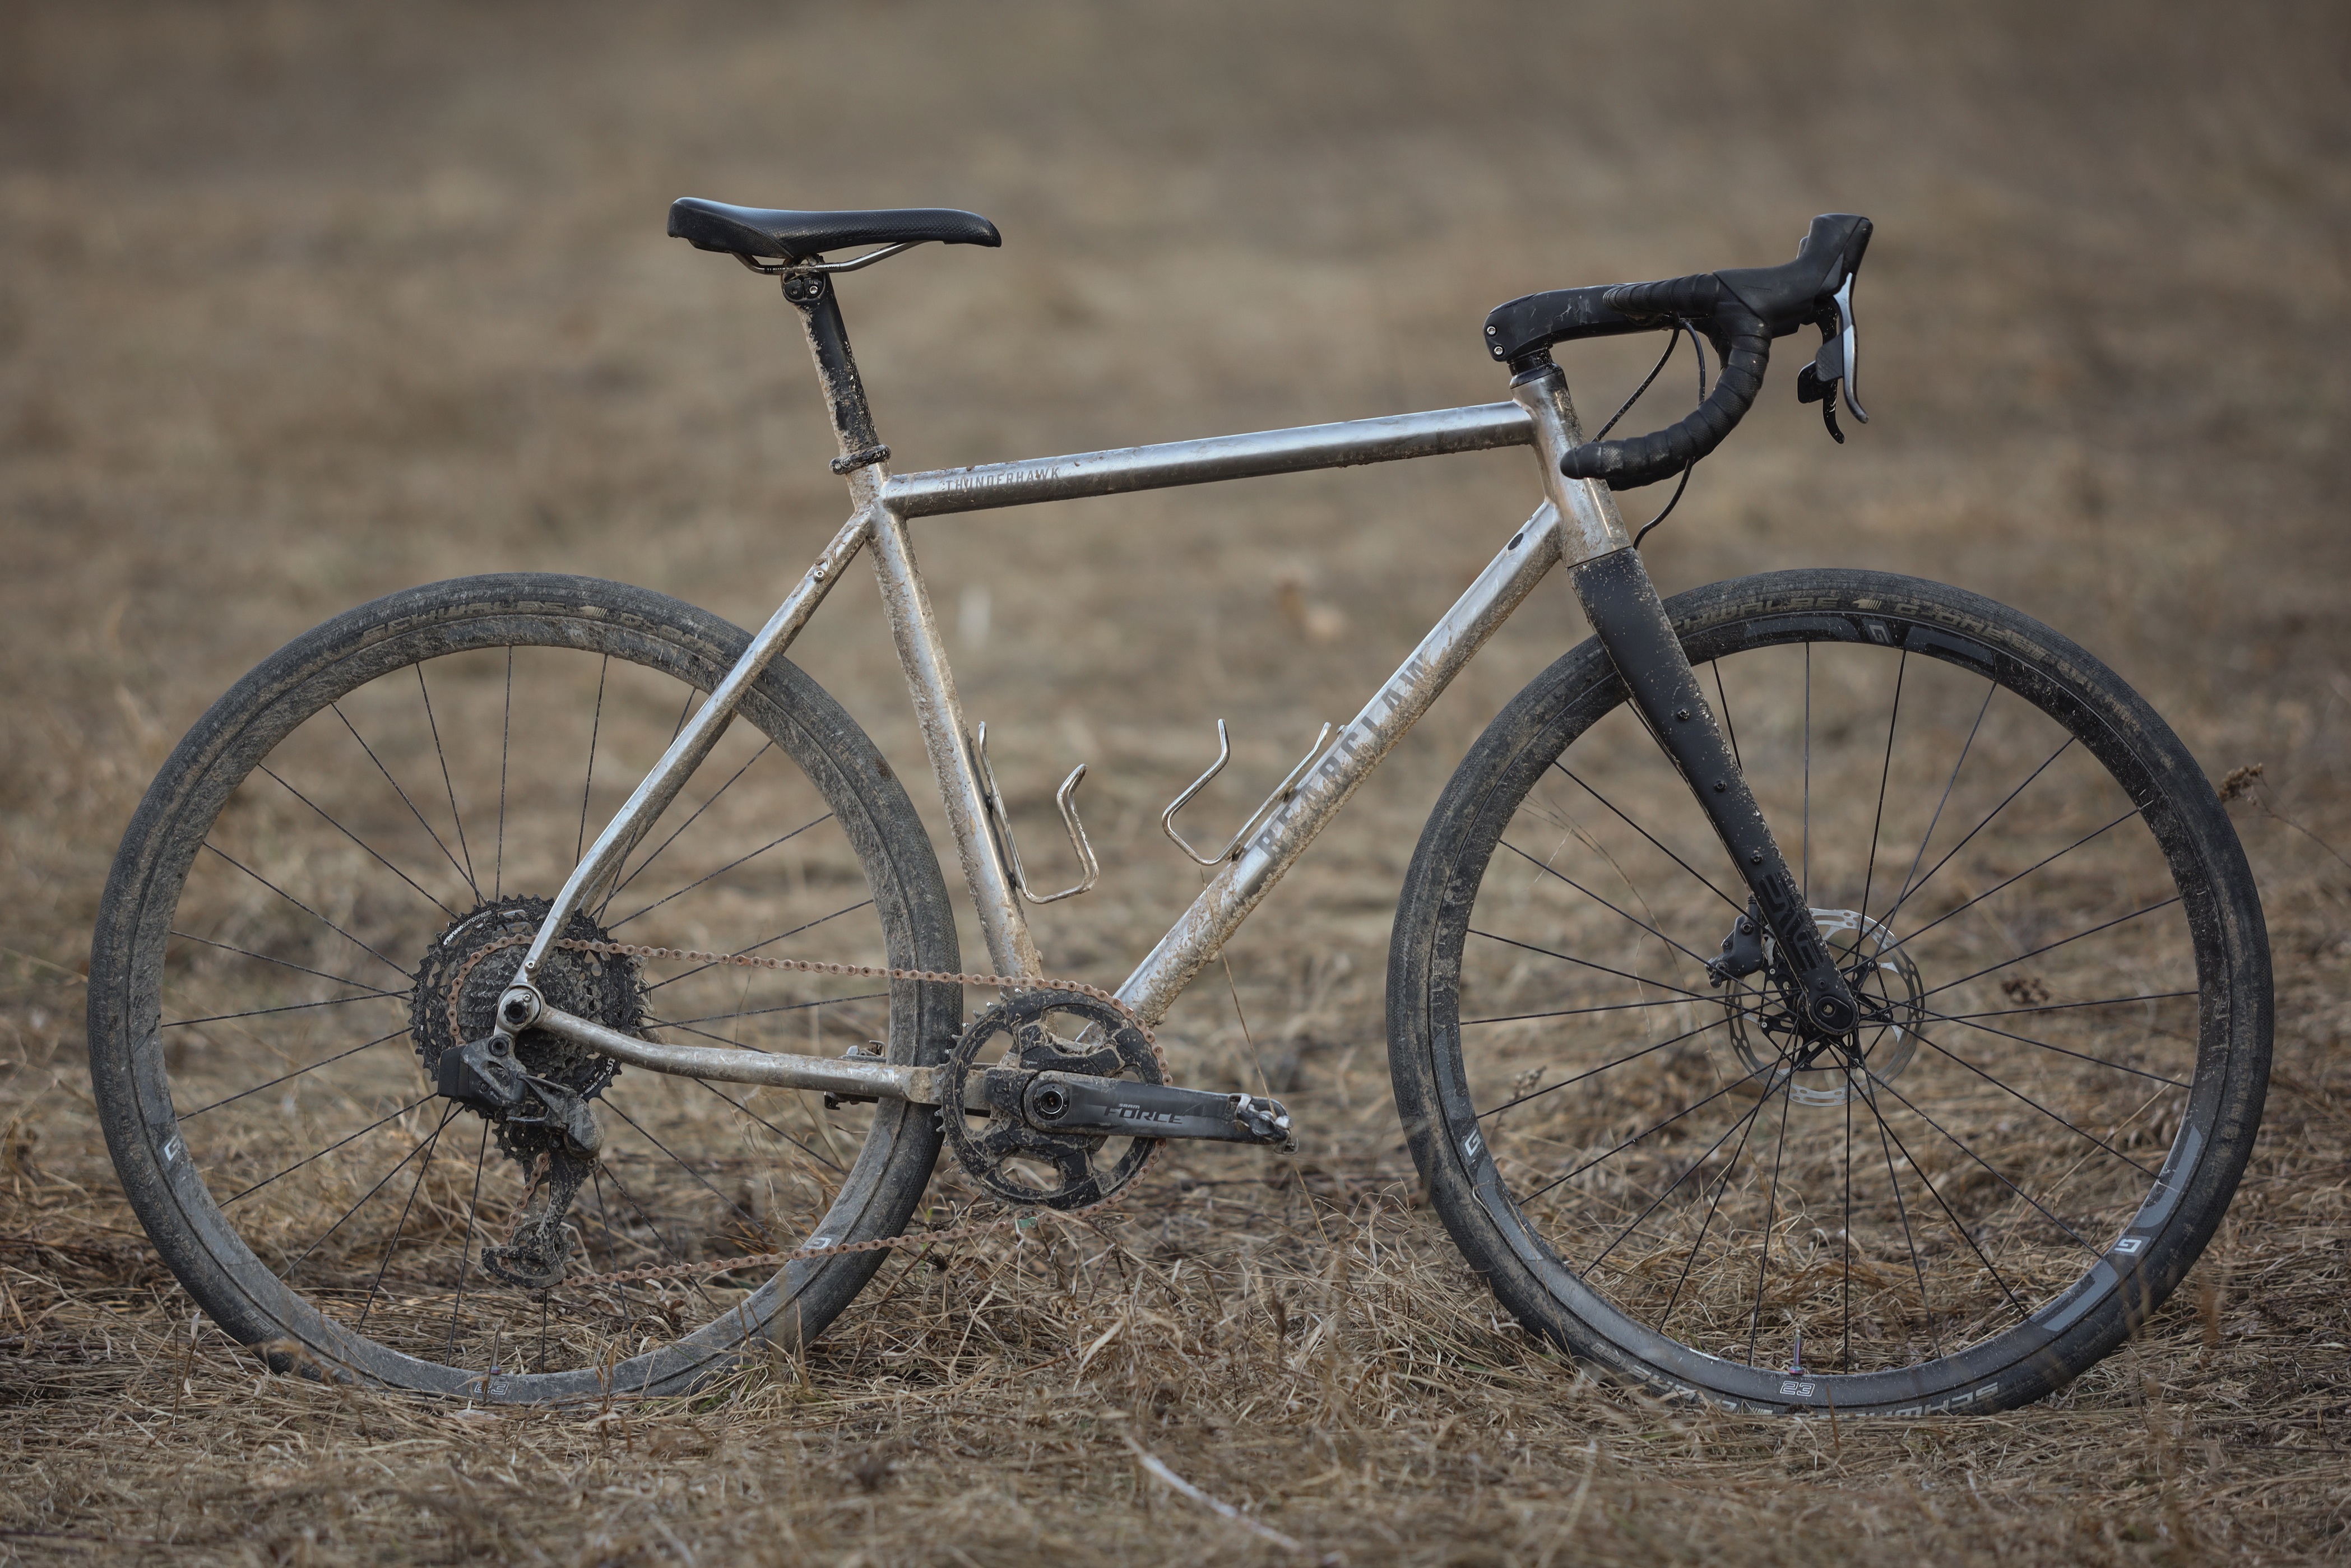 Thunderhawk, an all-road gravel race bike by Bearclaw Bicycle Co.